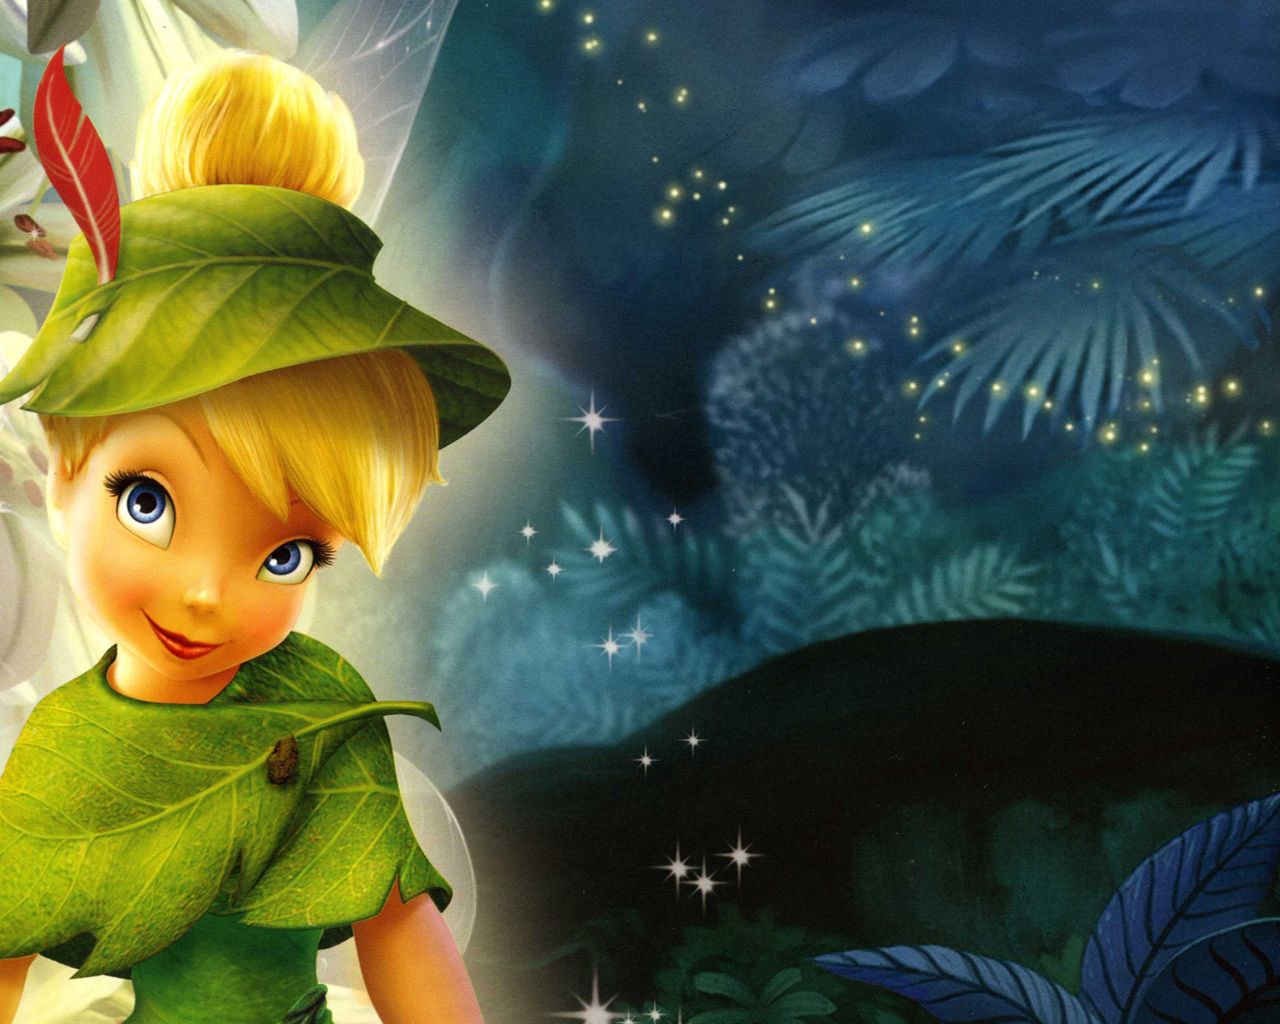 Find yourself a great Tinkerbell wallpaper with Disney fairies